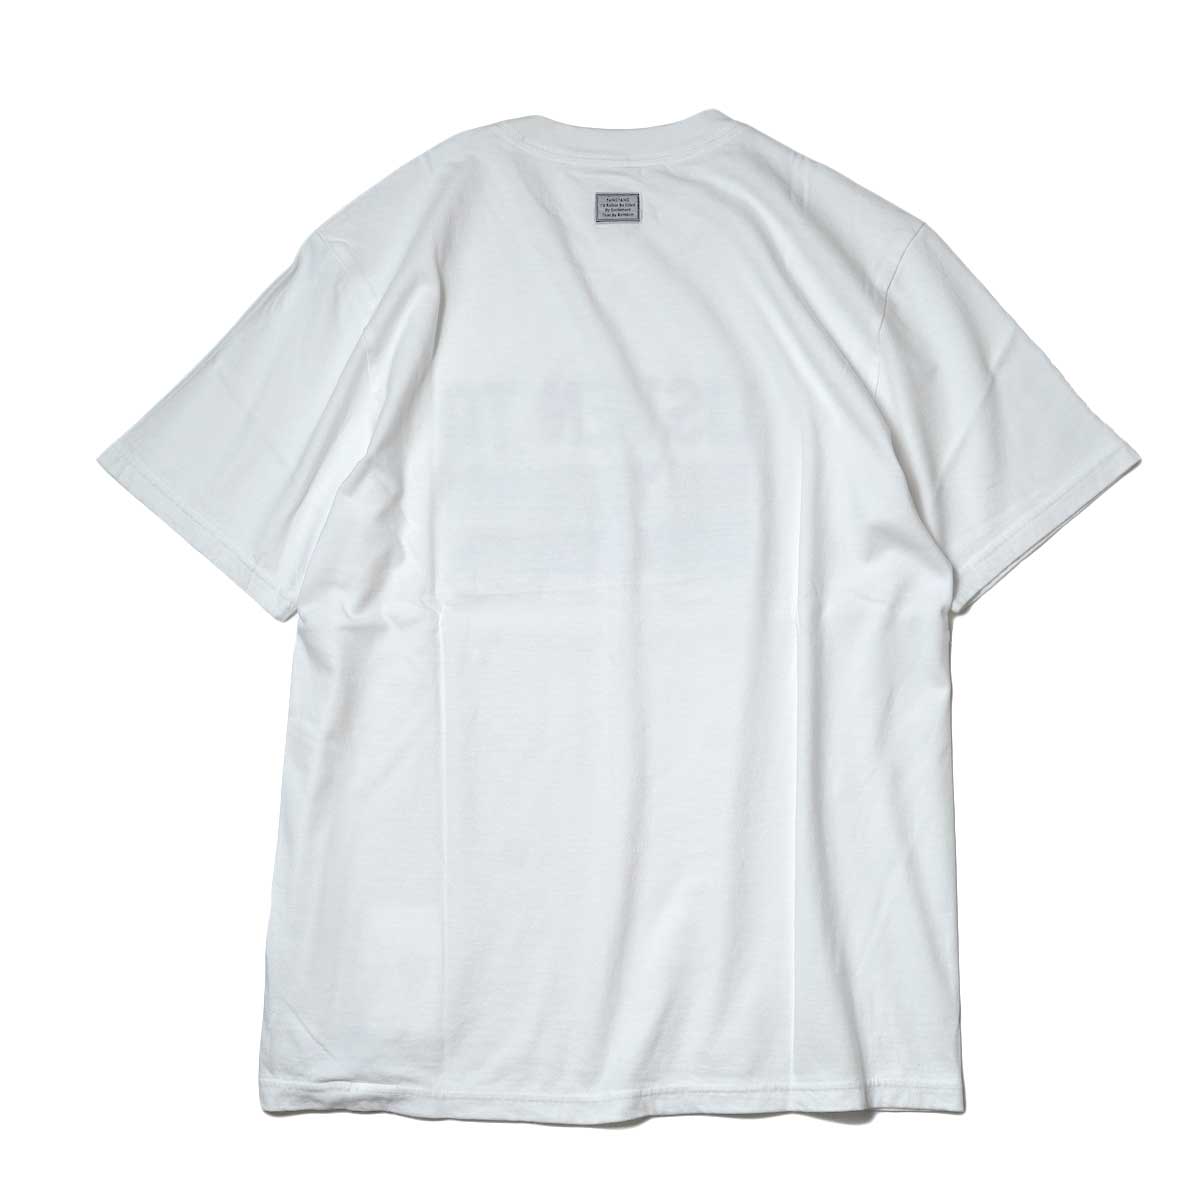 TANG TANG / FLAG -PATCHWORK- (White) 背面